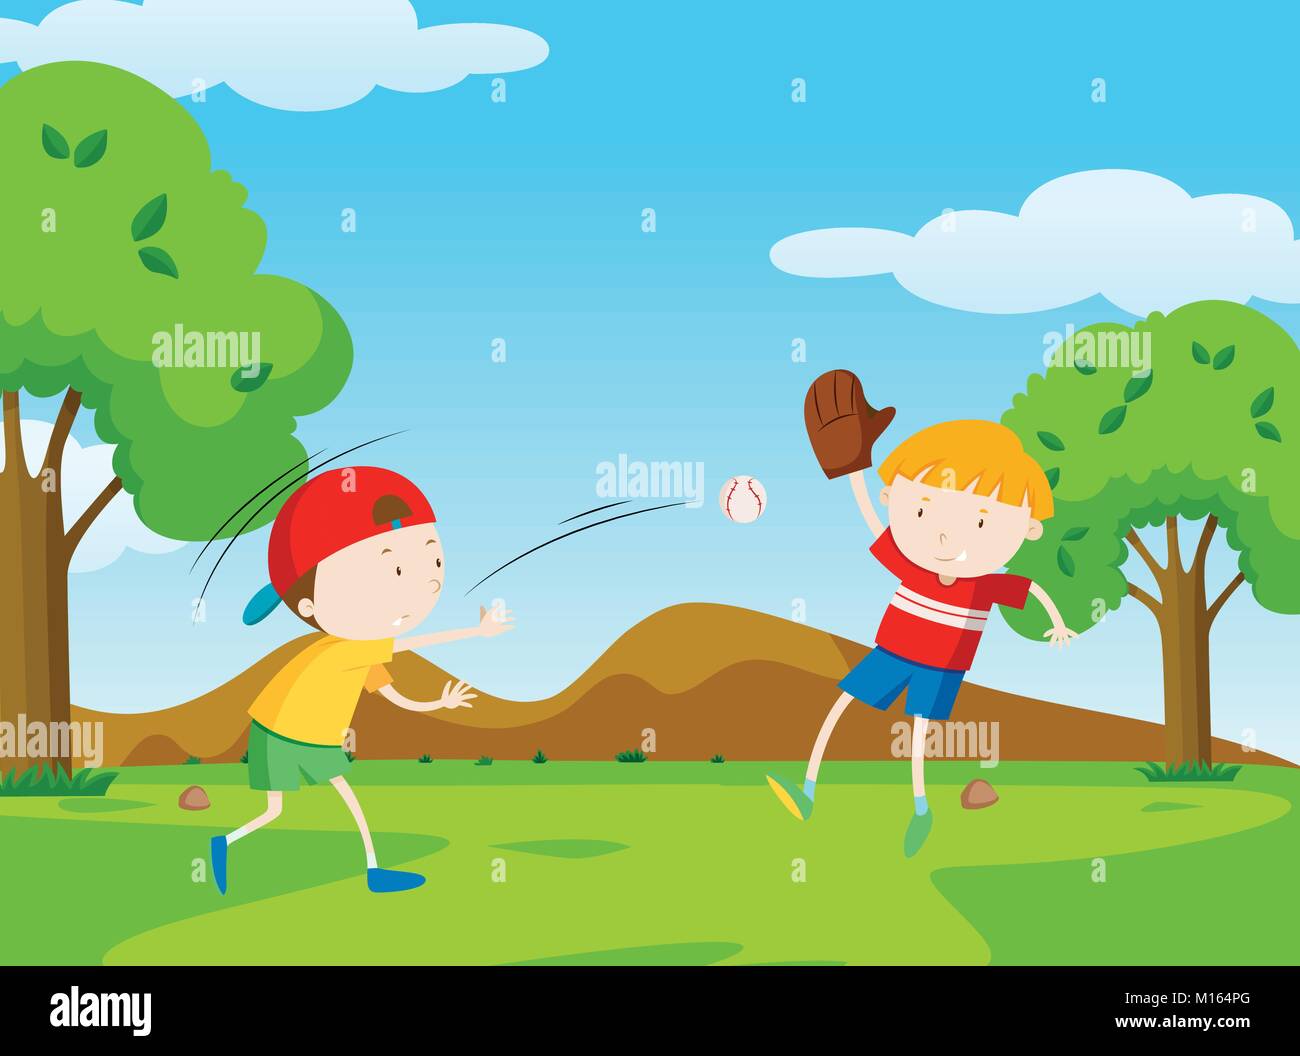 Two boys playing baseball in park illustration Stock Vector